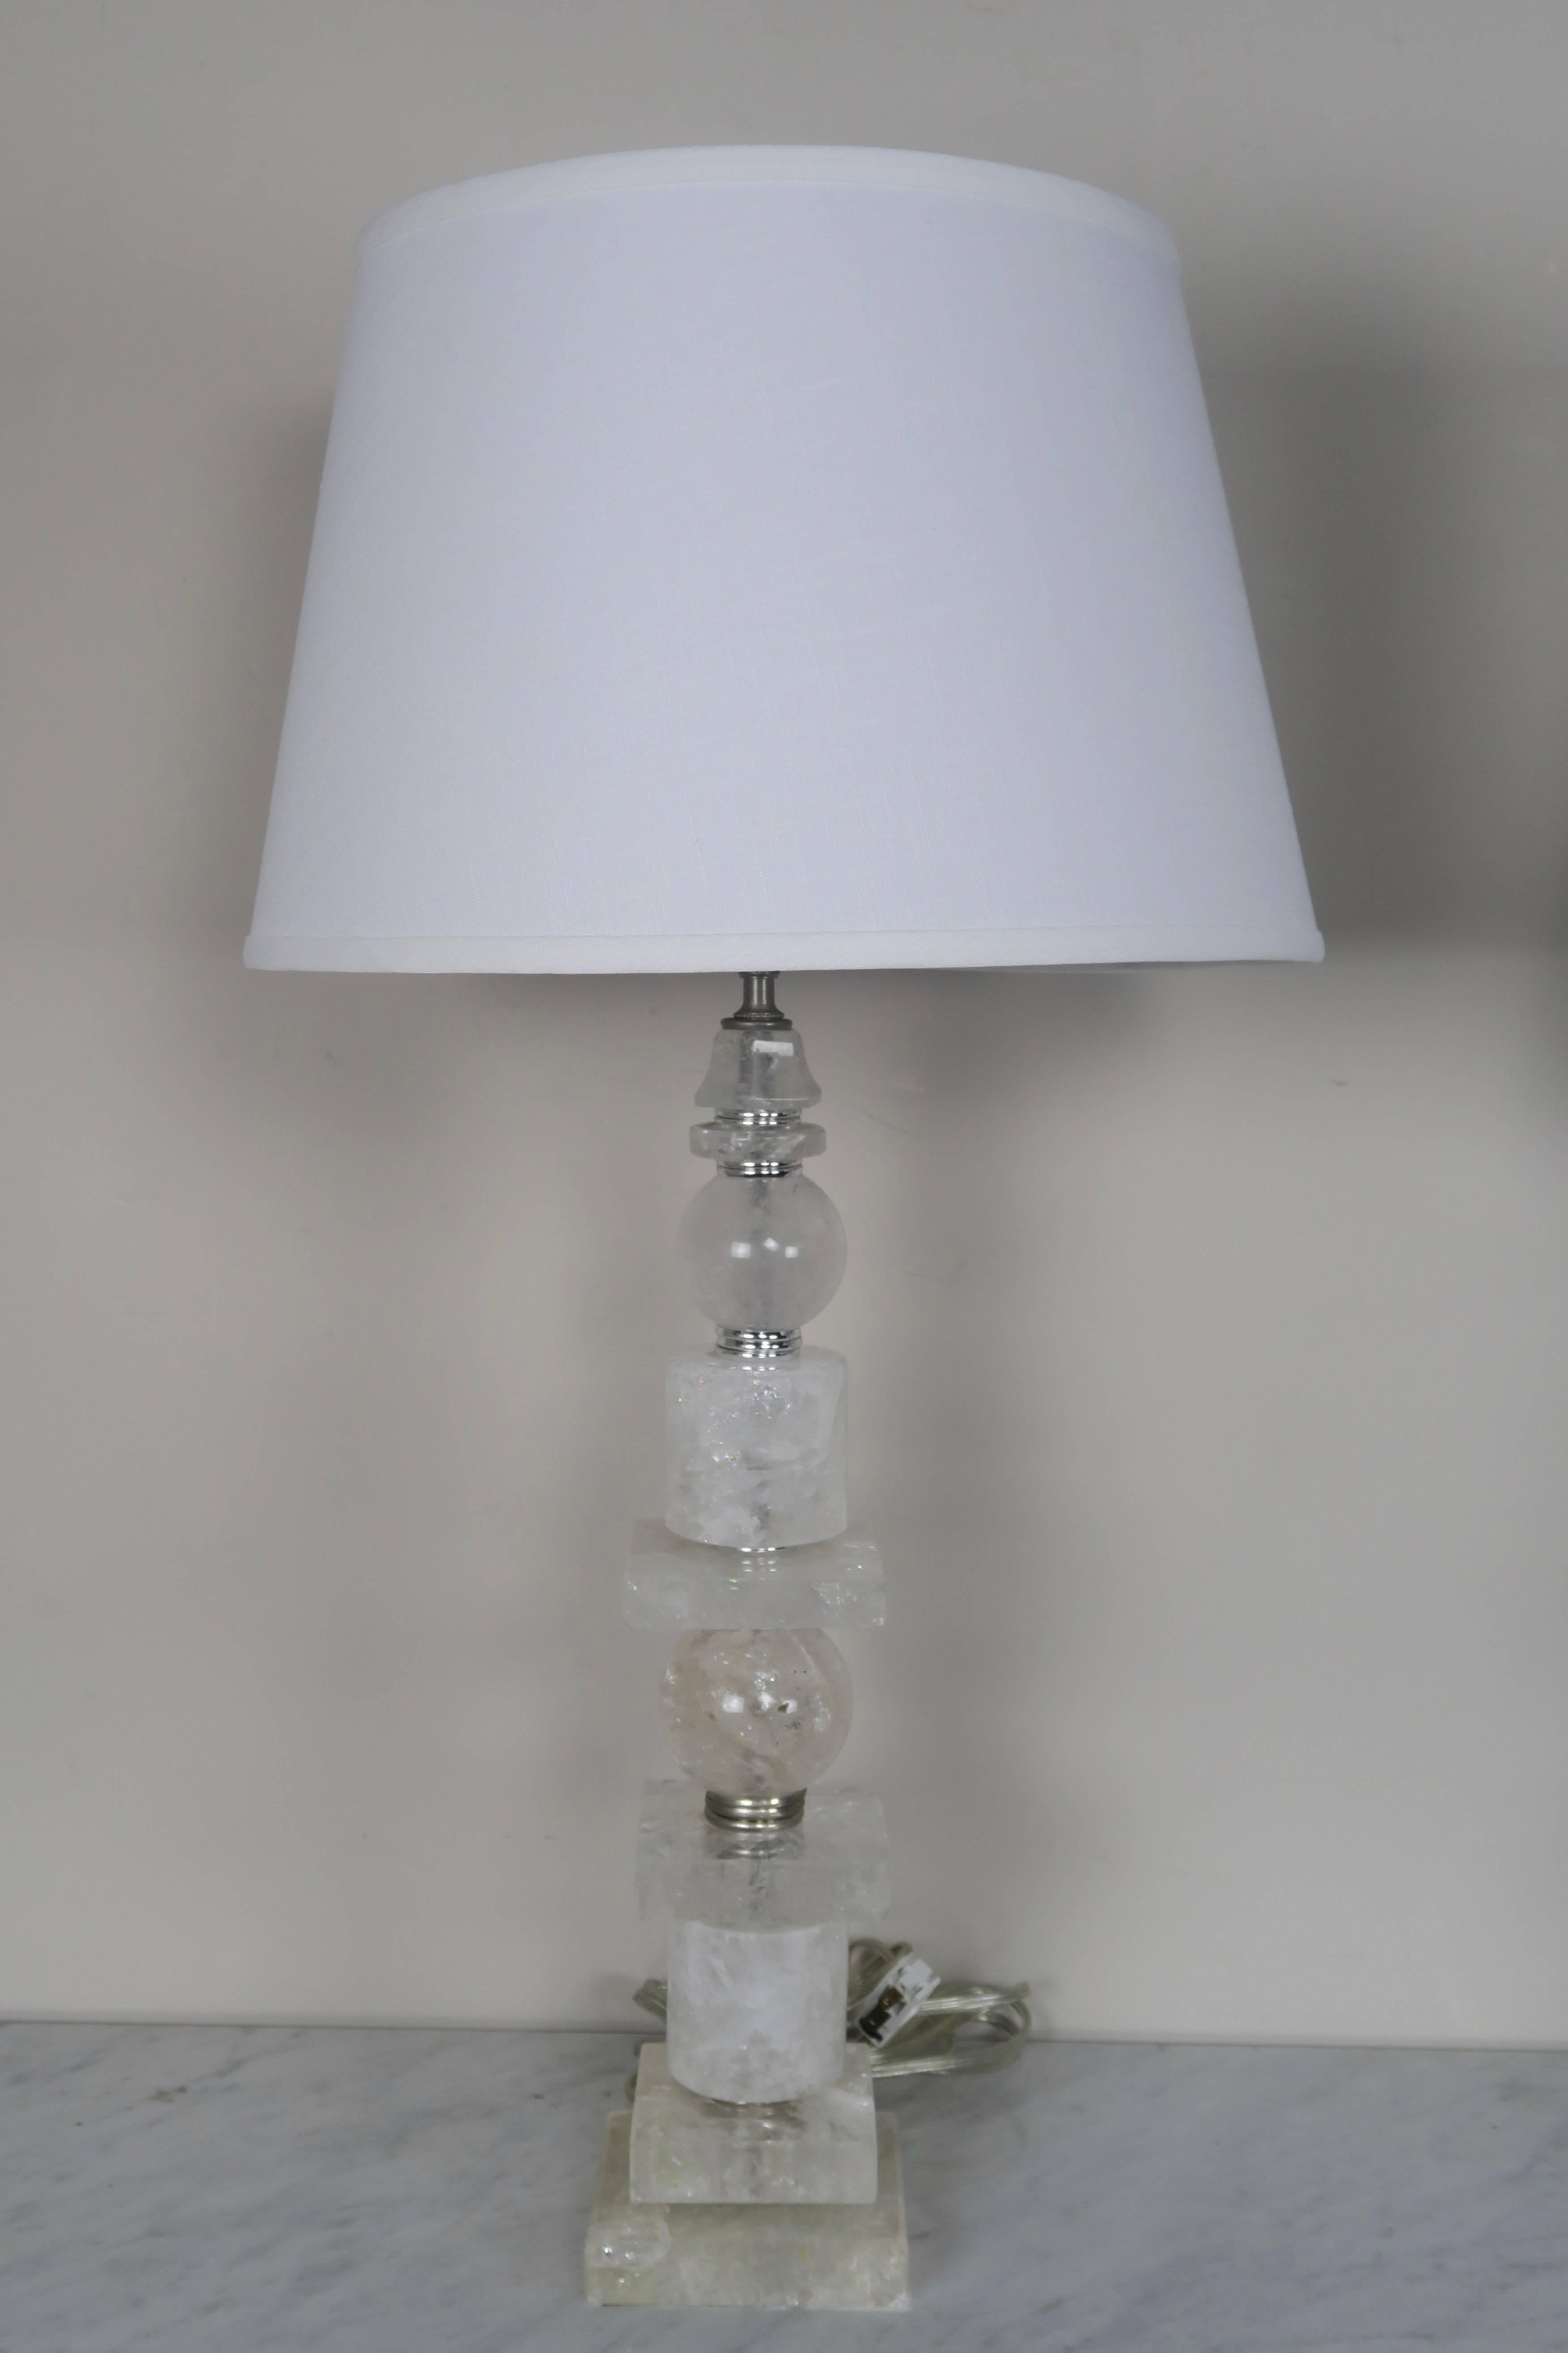 Pair of sculptured rock crystal quartz and polished nickel lamps. The lamps are finished with custom white linen shades. The lamps are newly rewired and ready to use.